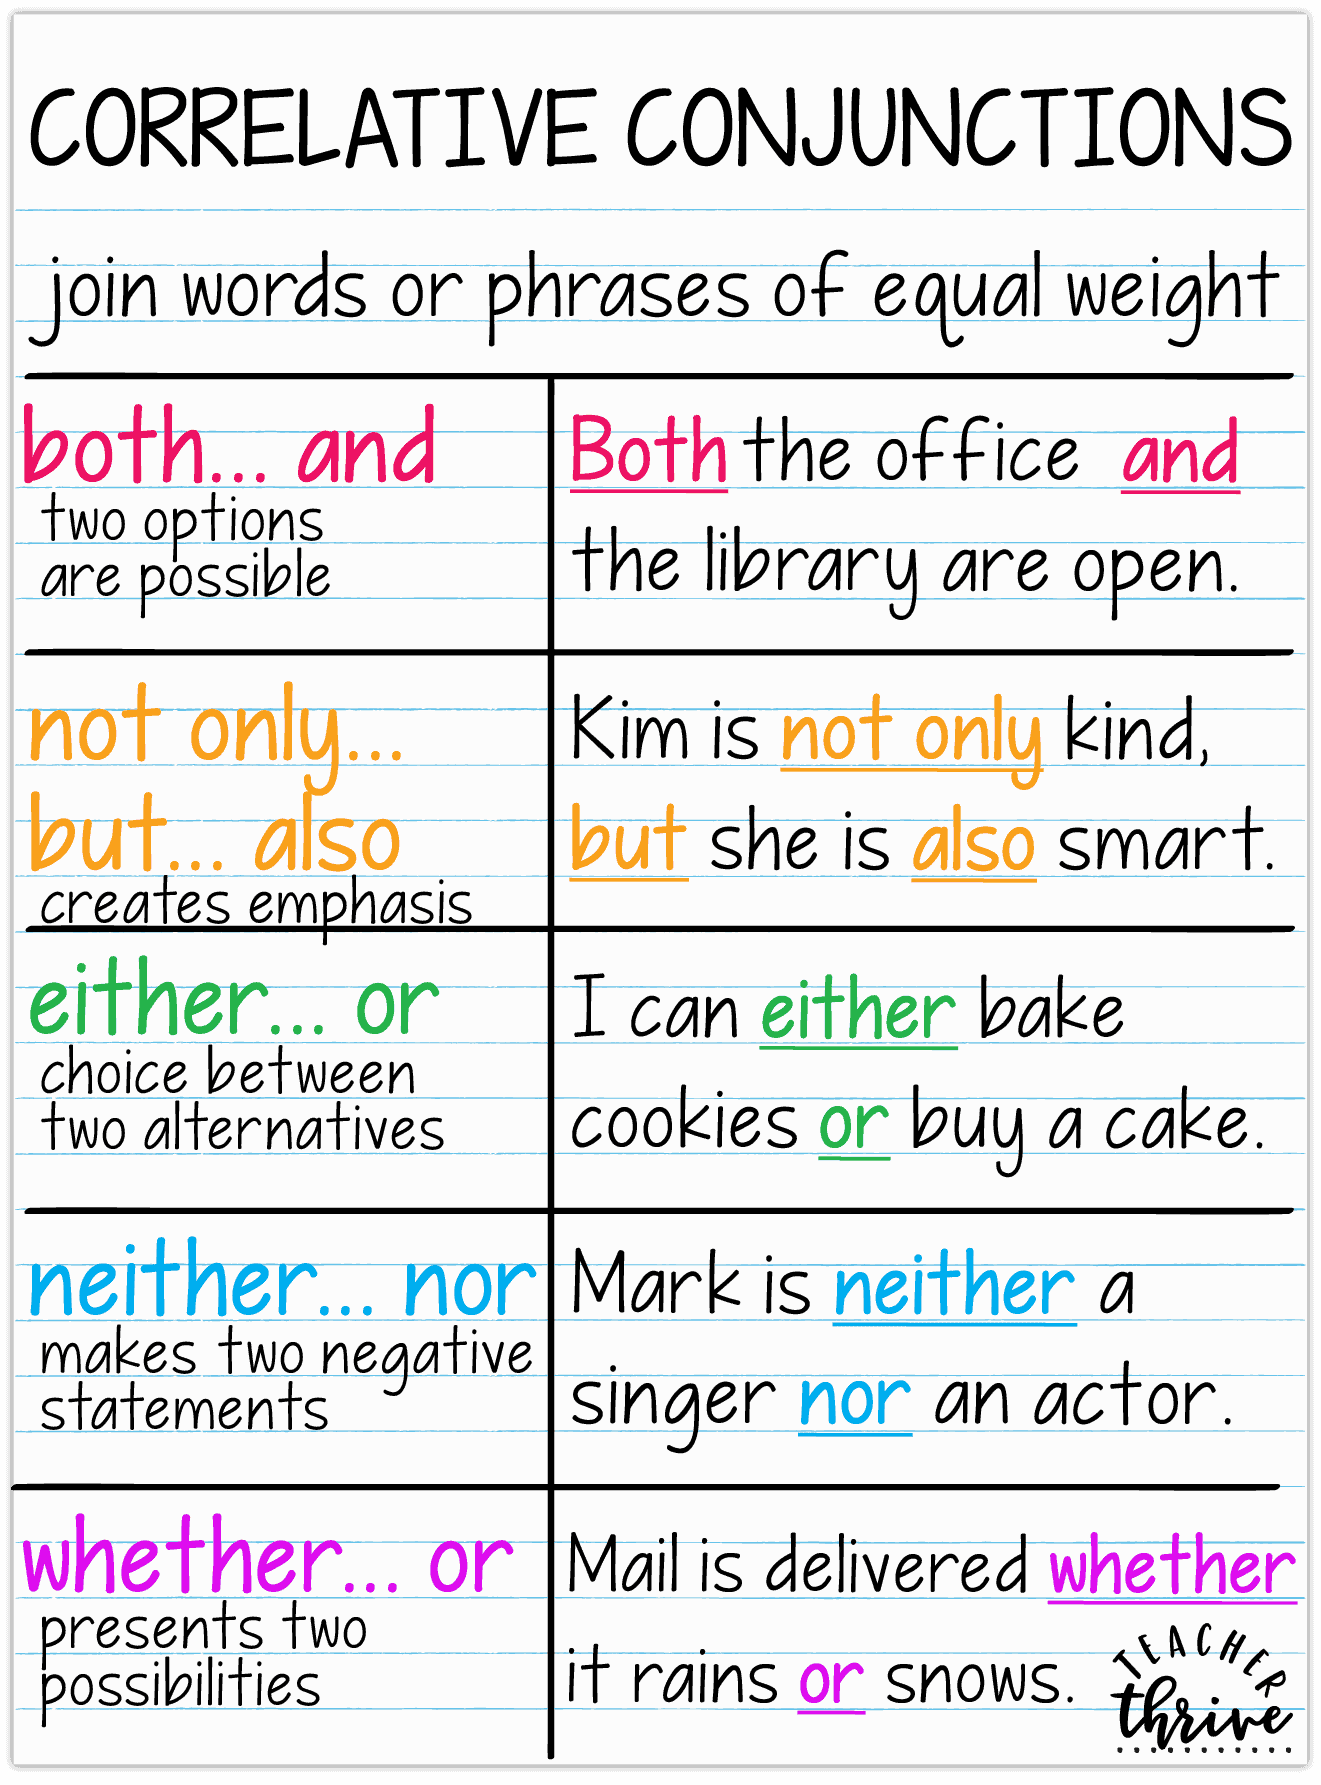 Correlative Conjunctions Exercises For Class 8